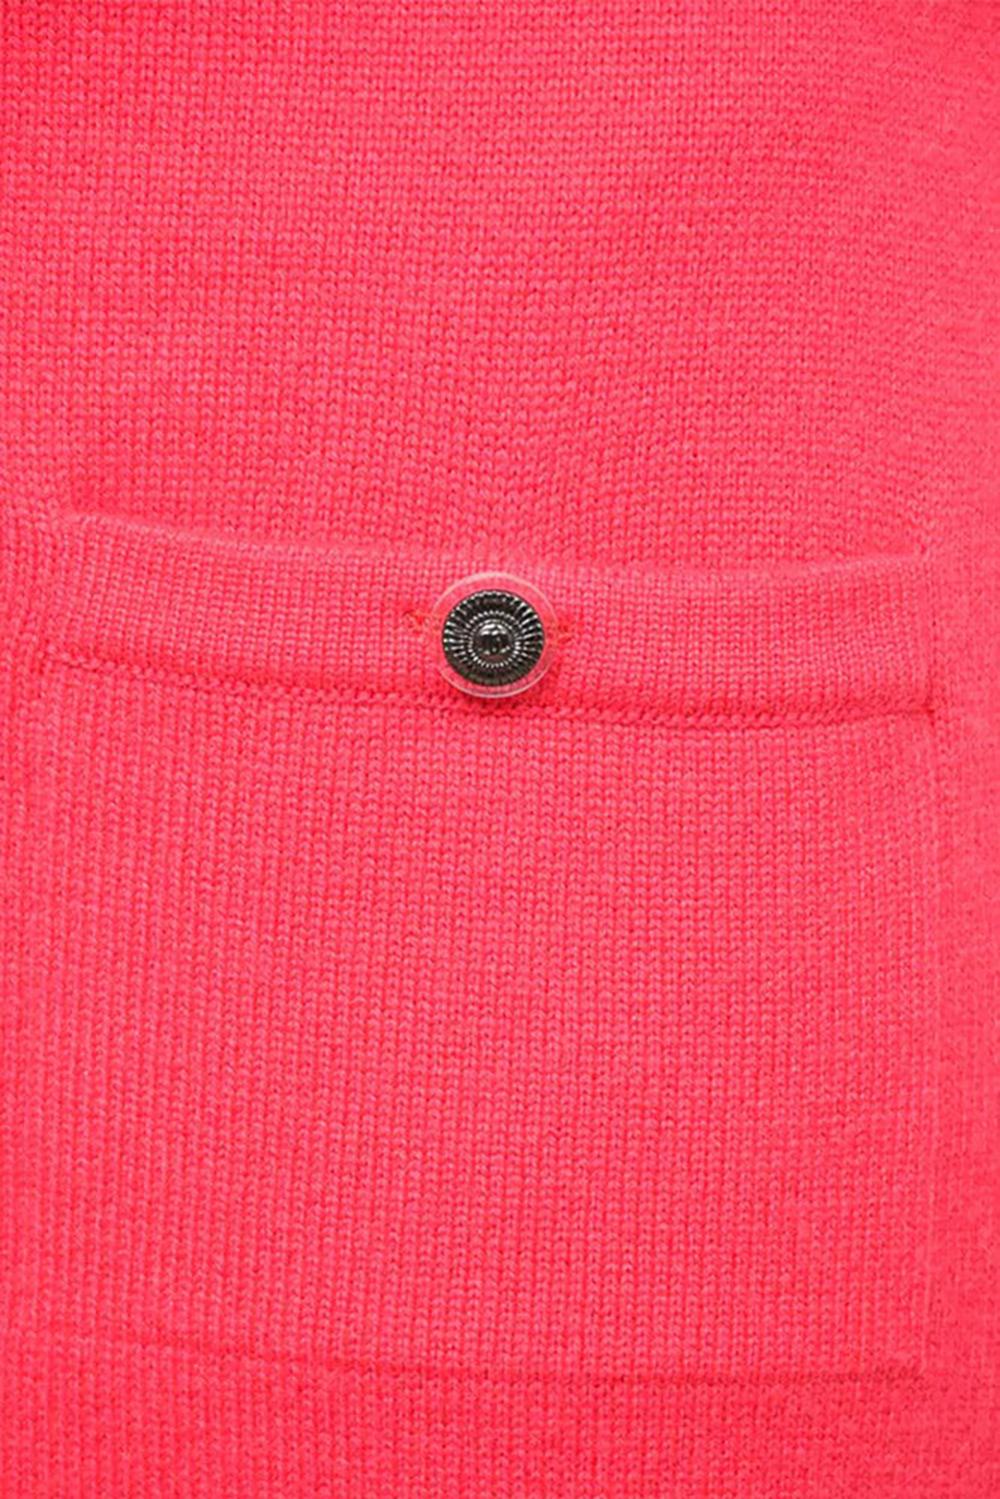 Women's or Men's Chanel CC Patch Candy Pink Cashmere Dress